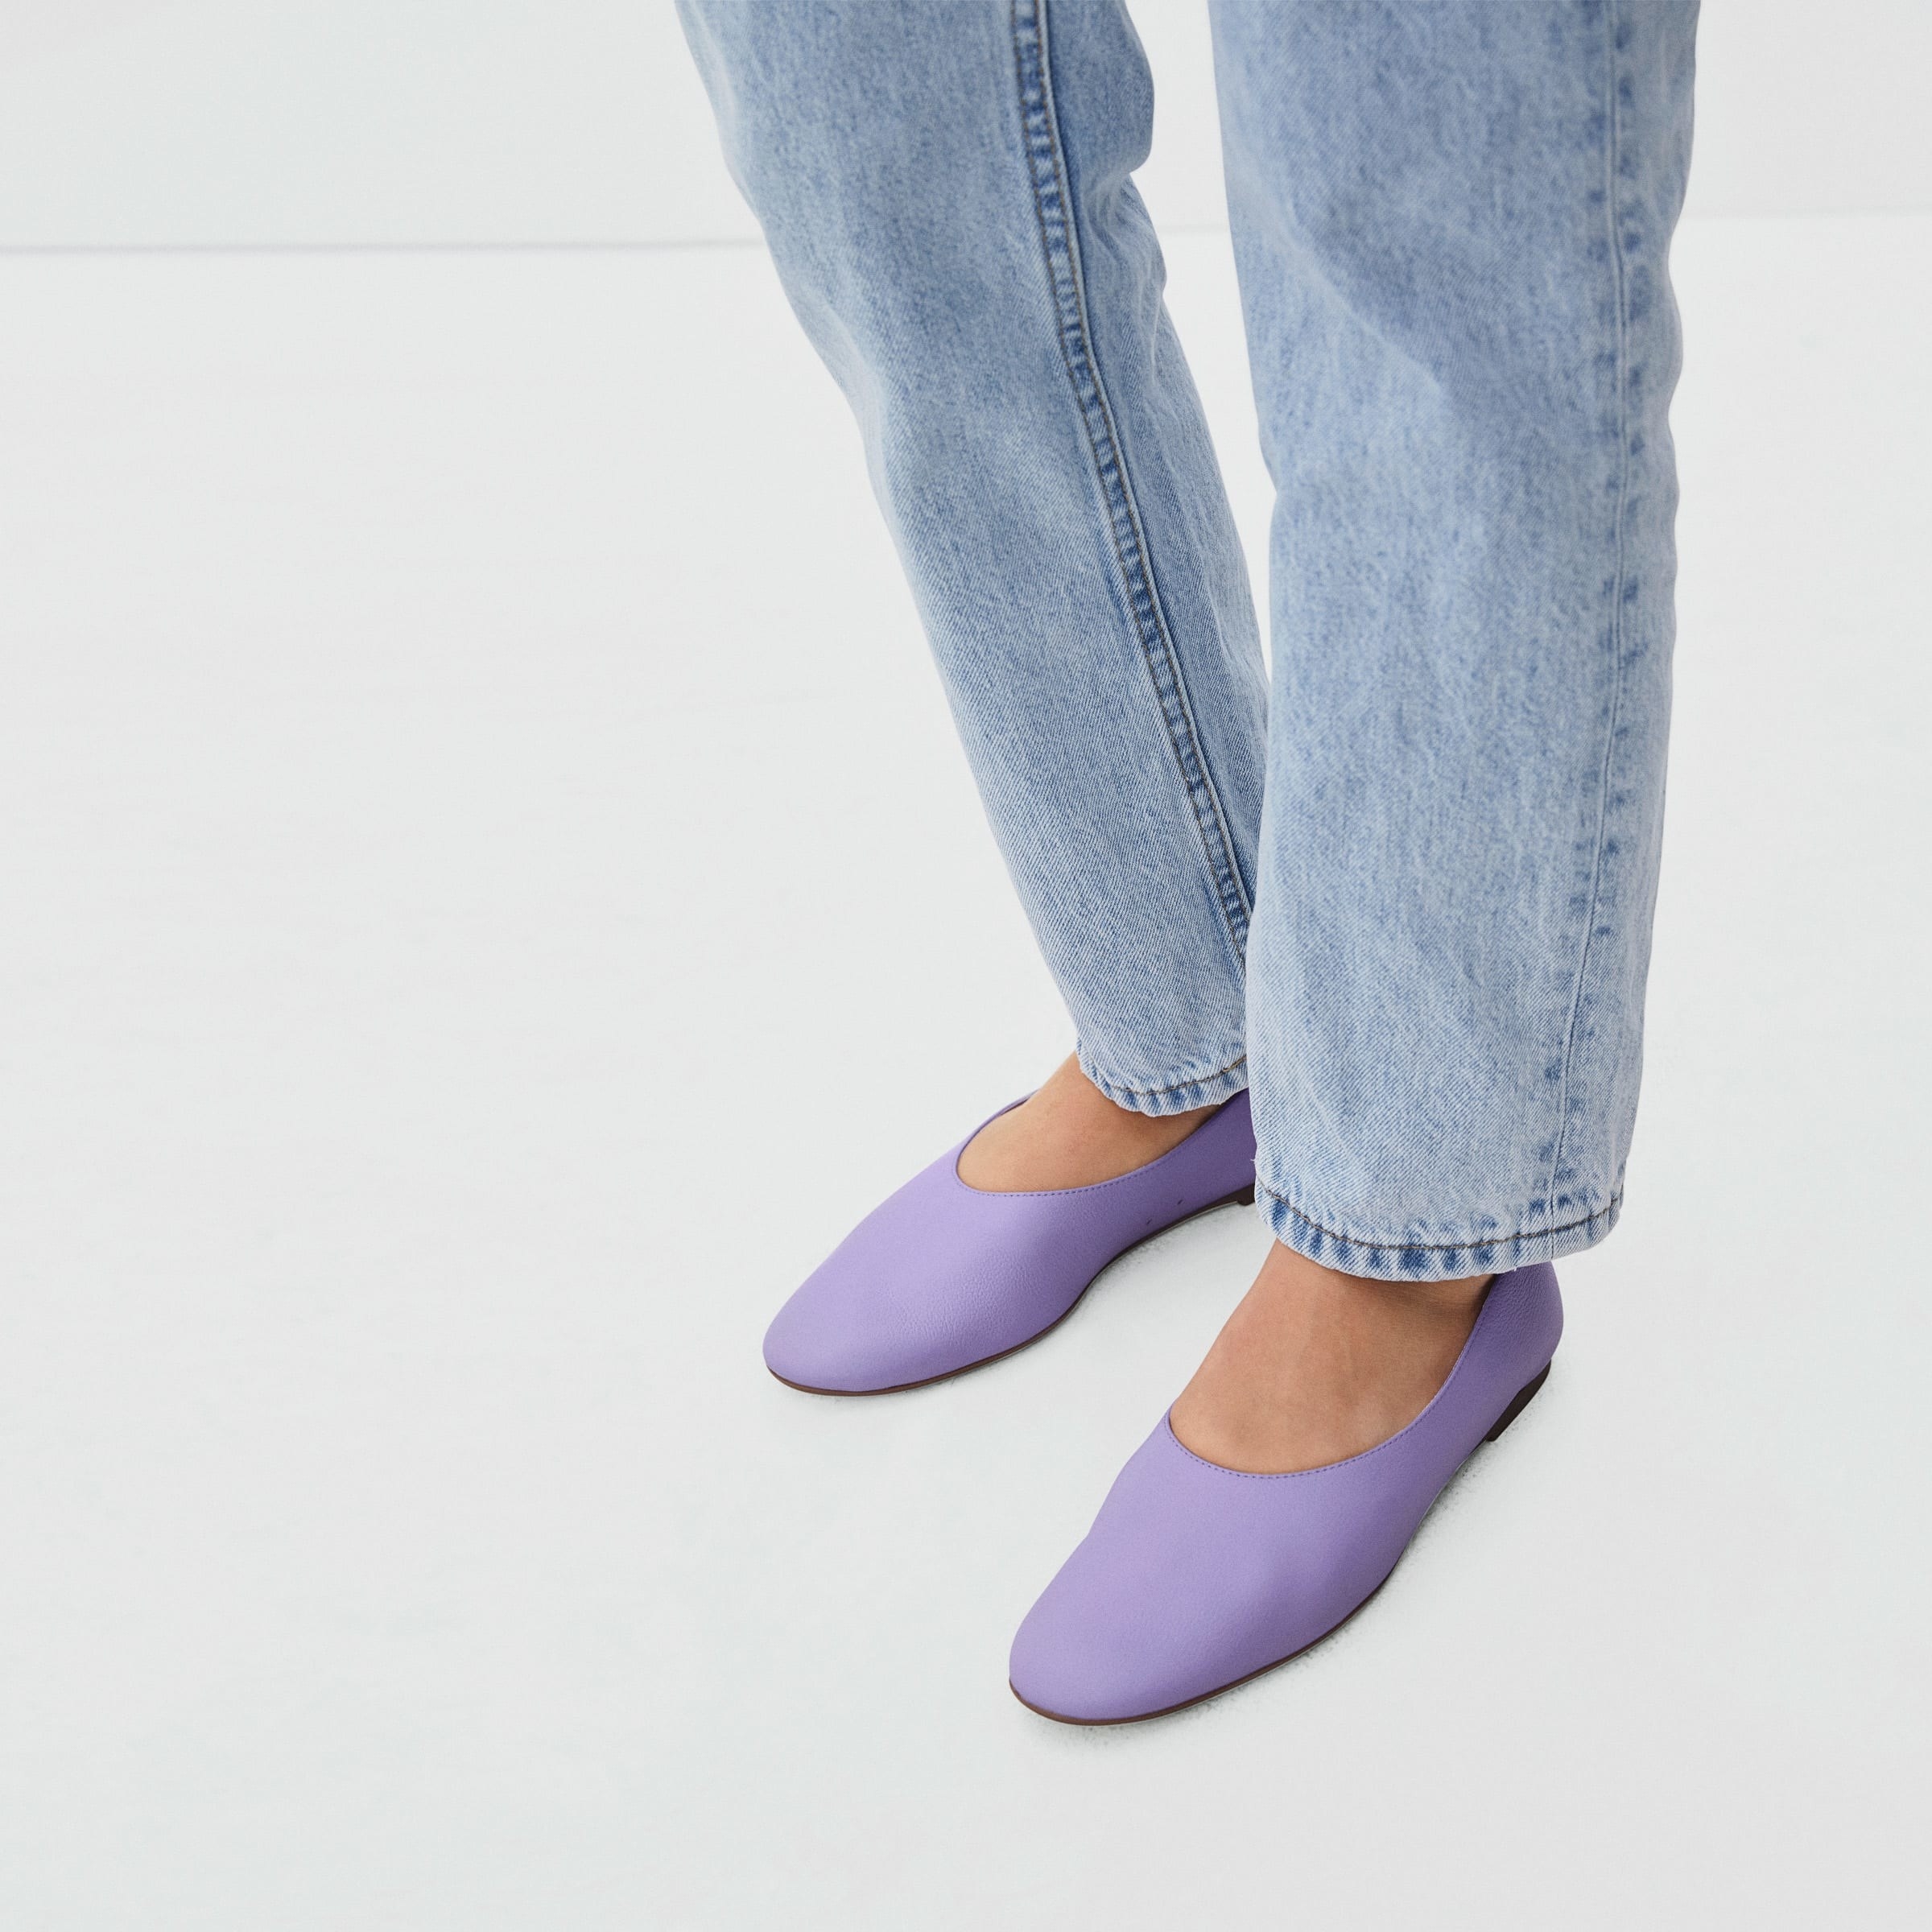 Model wearing the flats in purple showing off the rounded toe